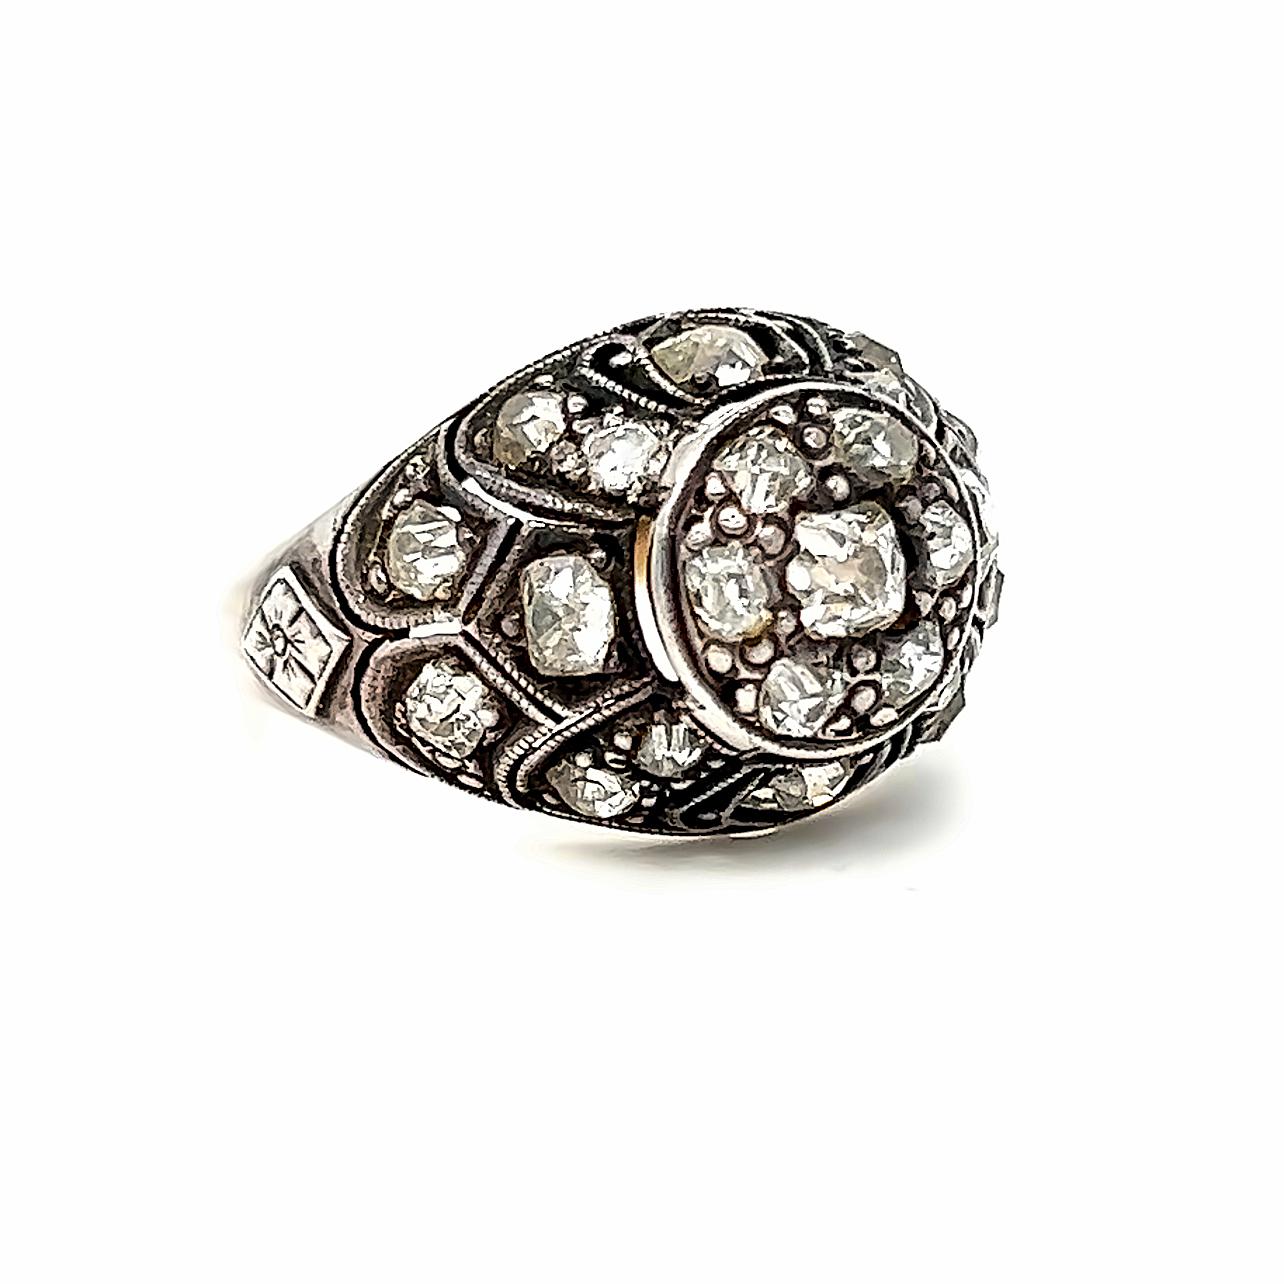 This Antique Silver topped Gold Diamond Ring Engagement Ring is a beautiful example of antique design and craftsmanship. Also super sparkly! Crafted in 8K Yellow Gold, and topped in Silver, this ring features amazingly detailed openwork with Pave